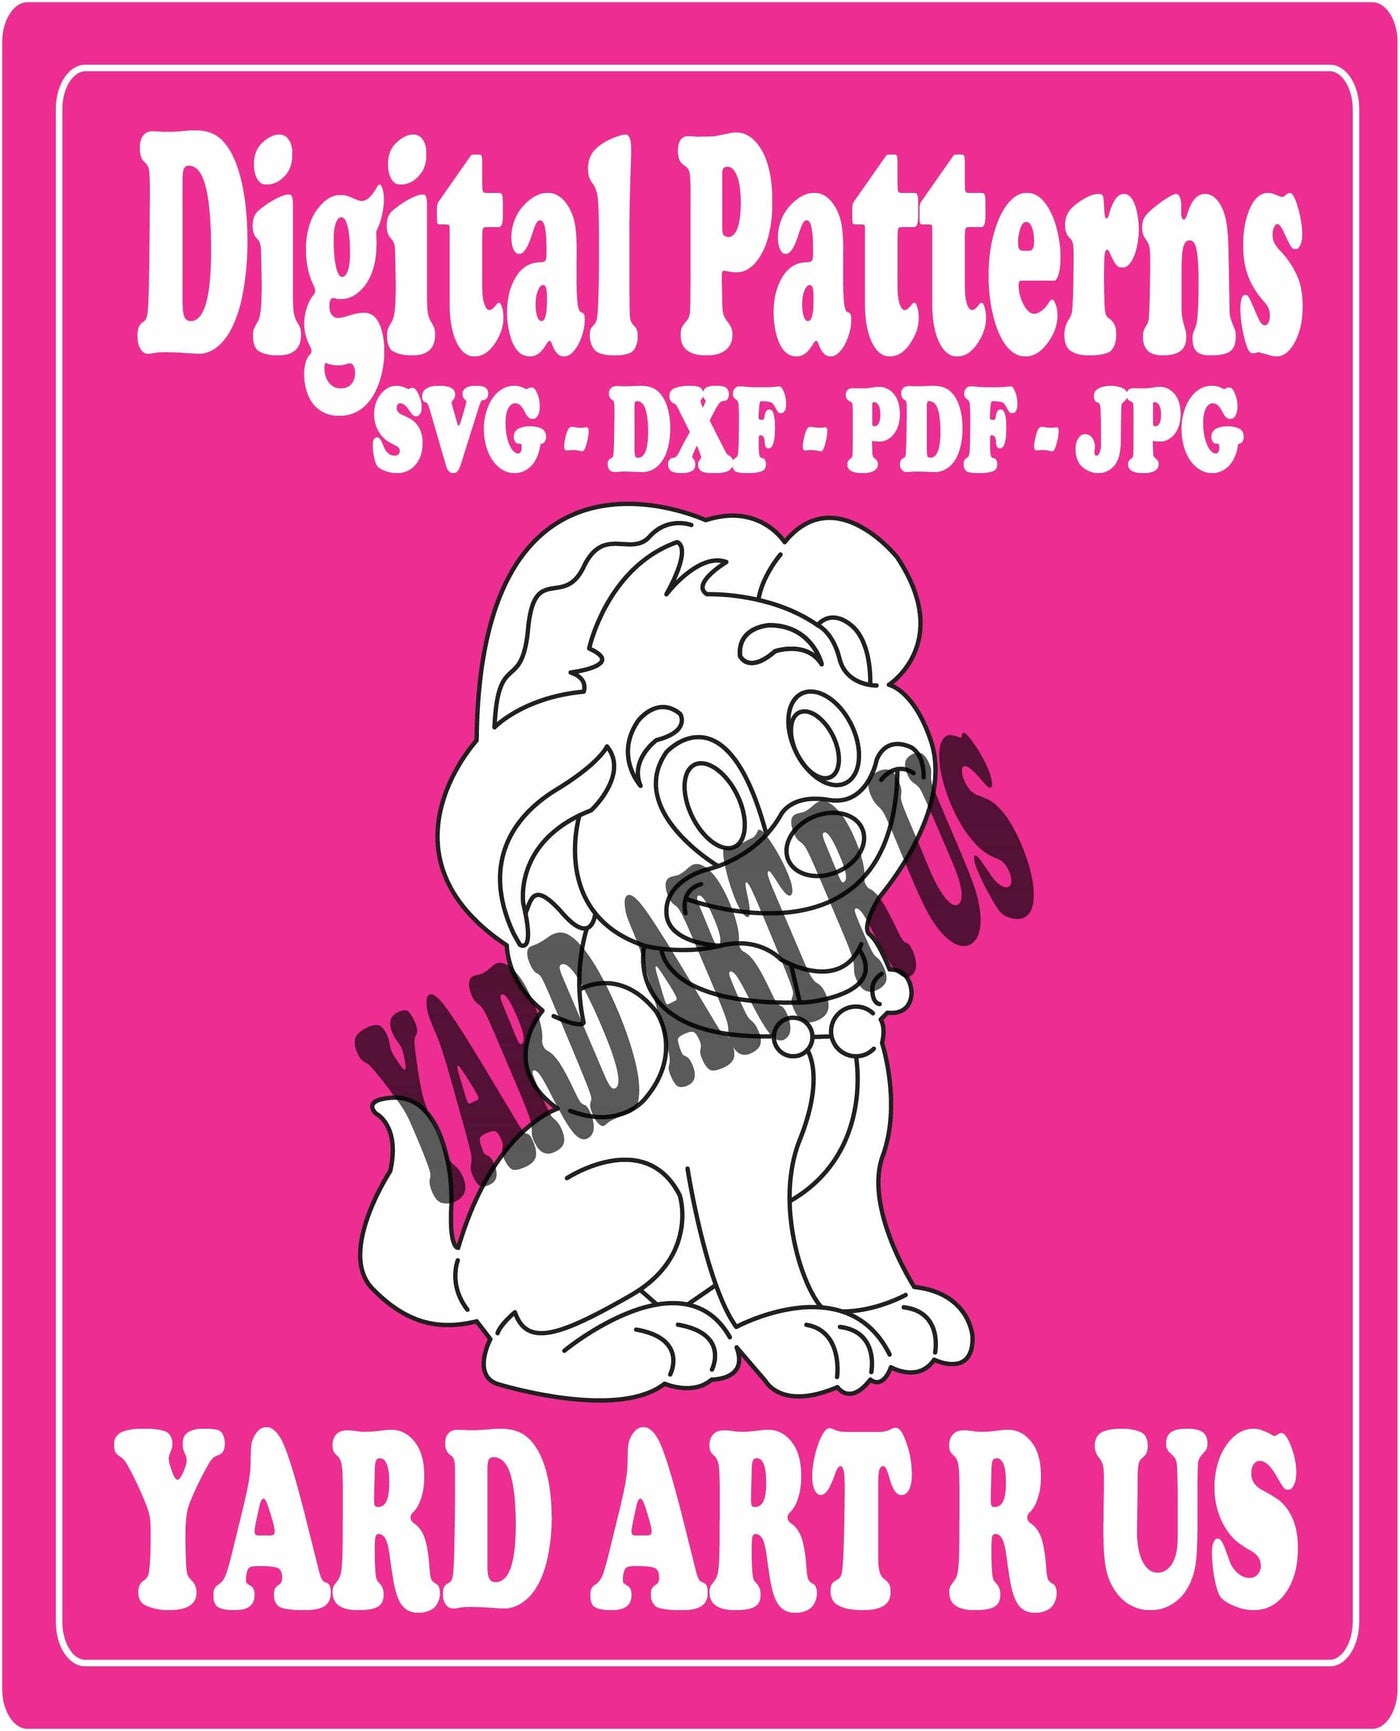 Digital Cut File for Merry Christmas Yard Art  Dog with Hat - SVG - DXF - PDF - JPG Files